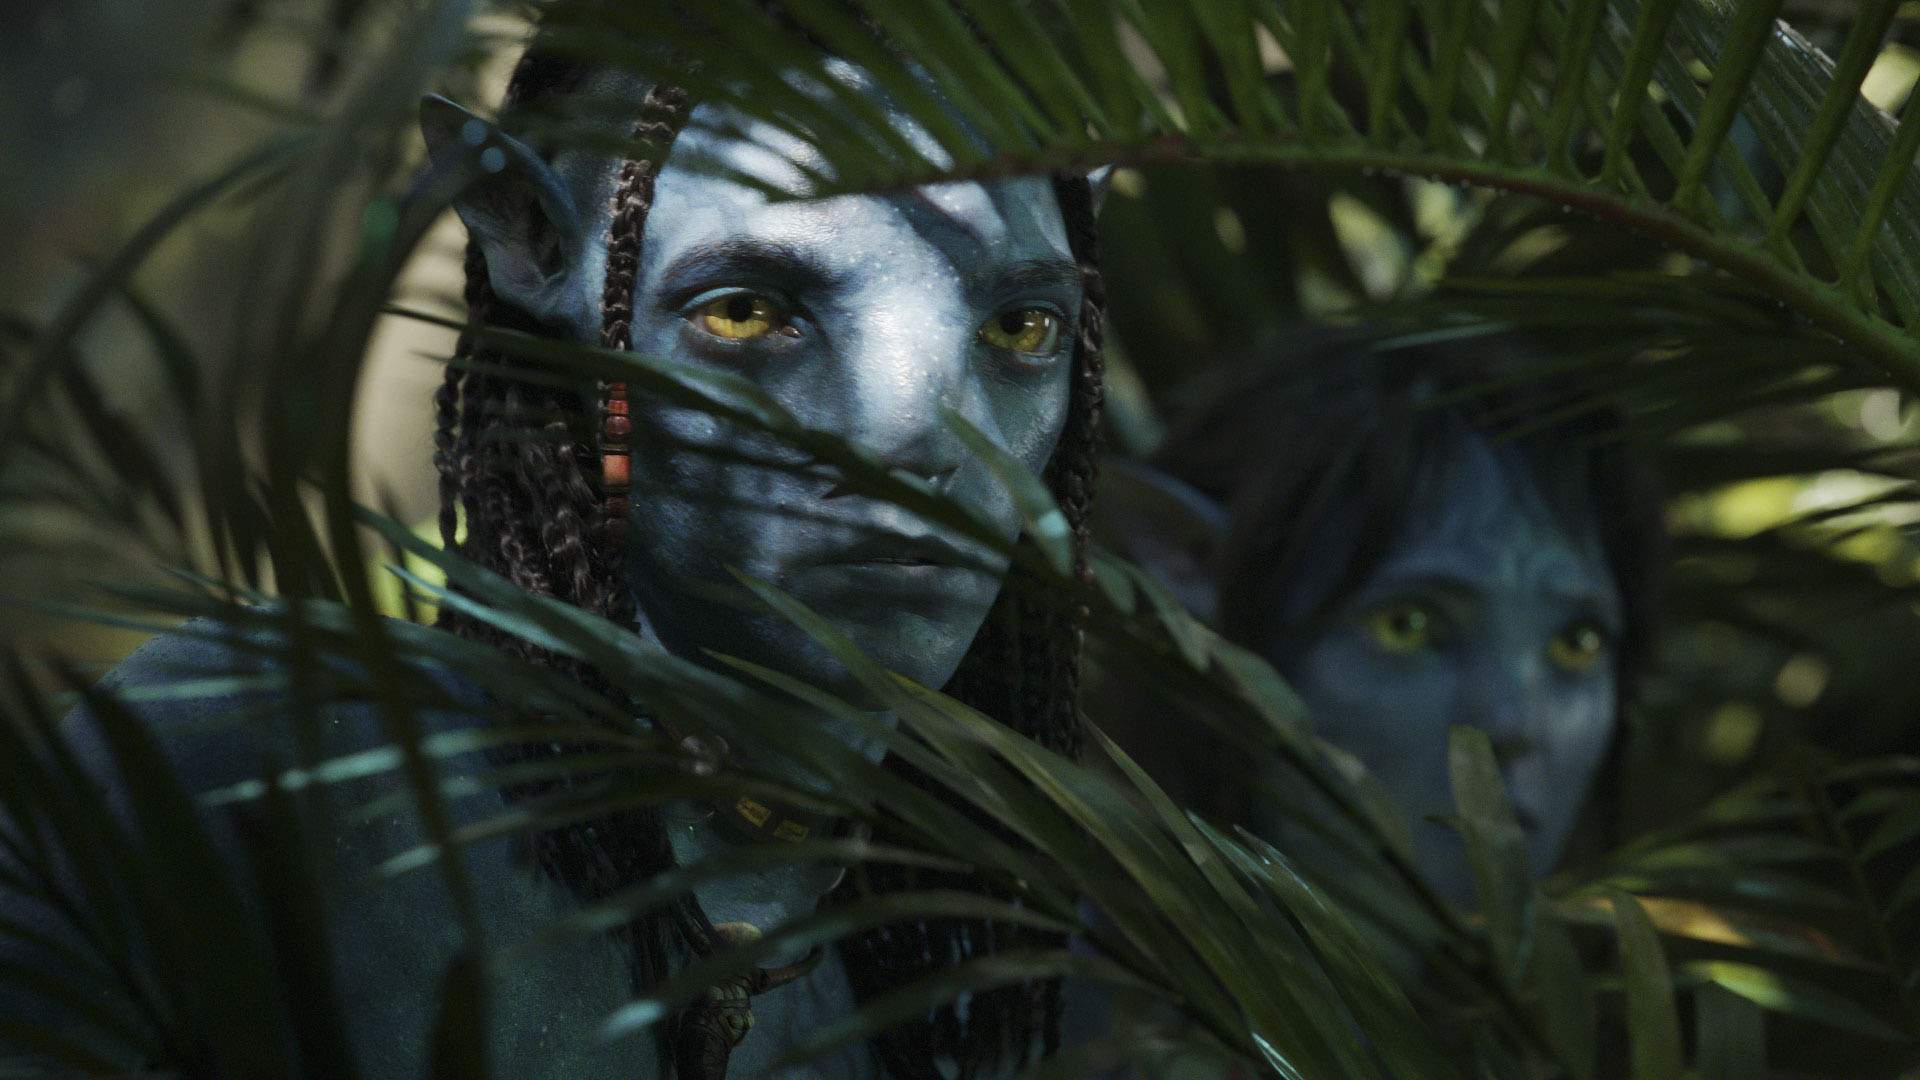 The First Trailer for Long-Awaited 'Avatar' Sequel 'The Way of Water' Has Finally Splashed Online